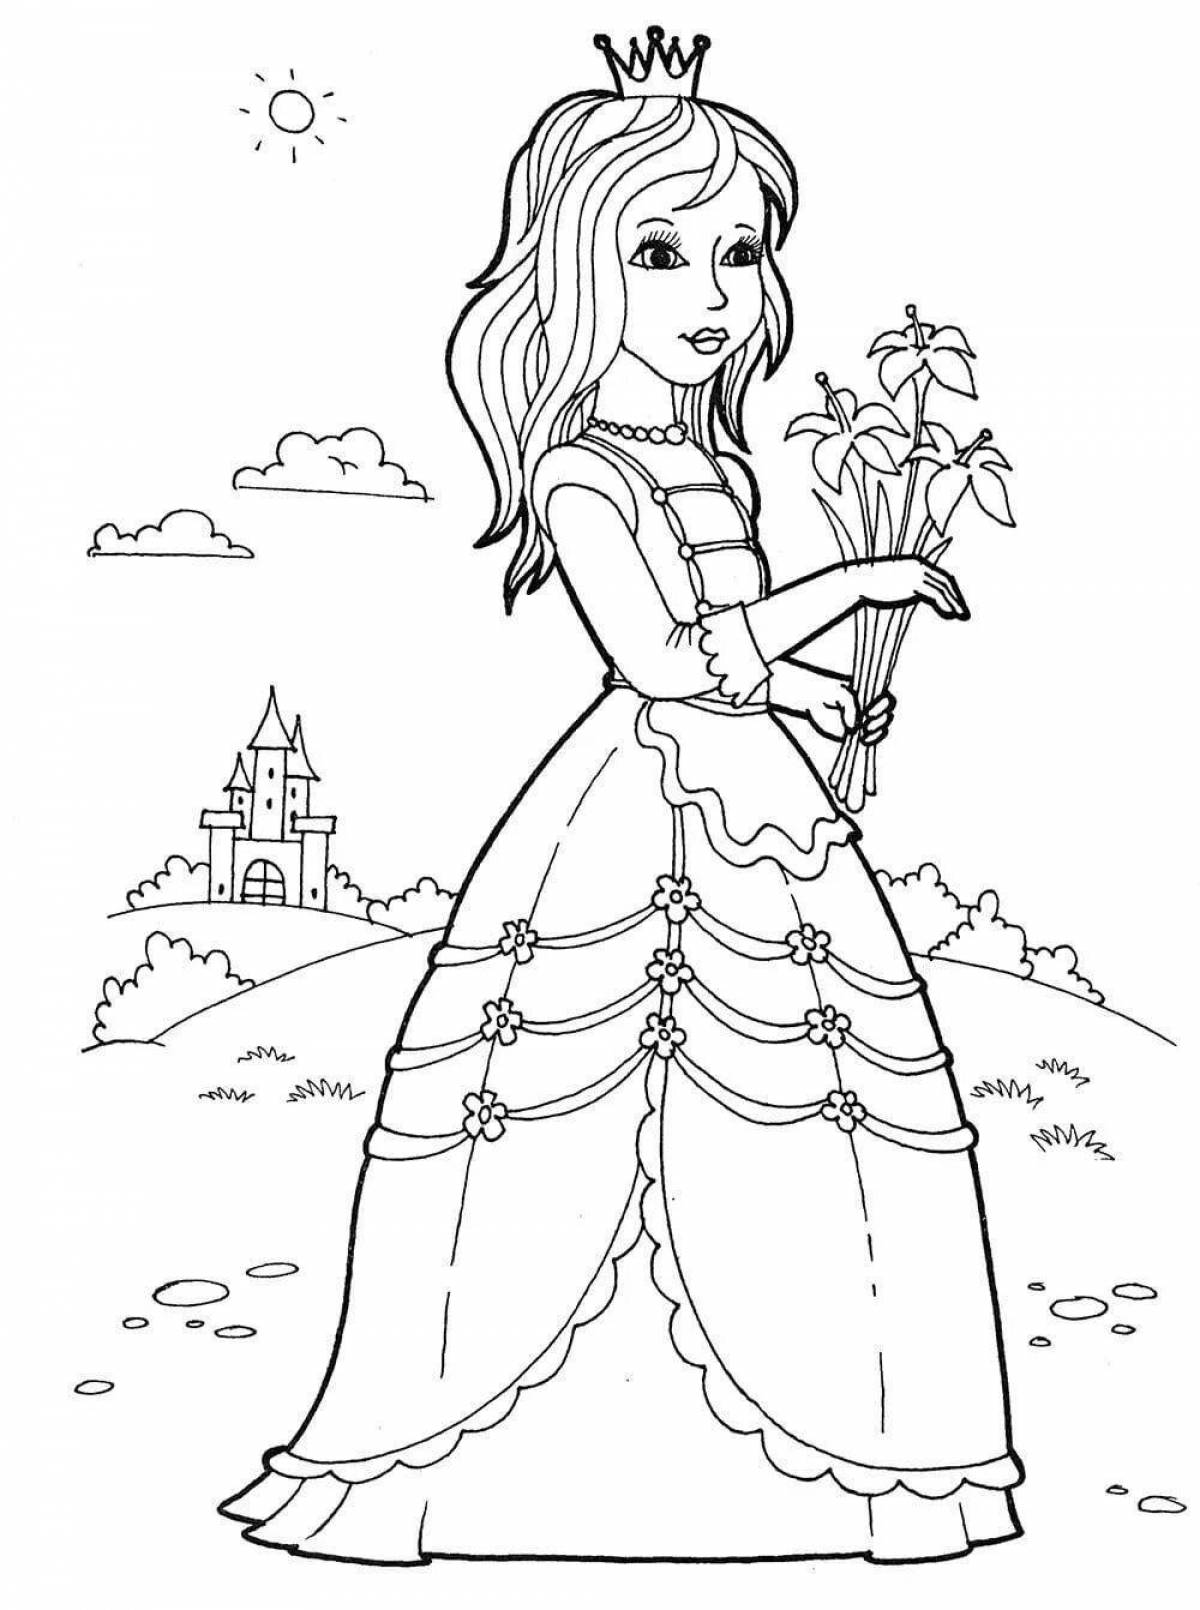 Coloring book for girls 7-8 years old